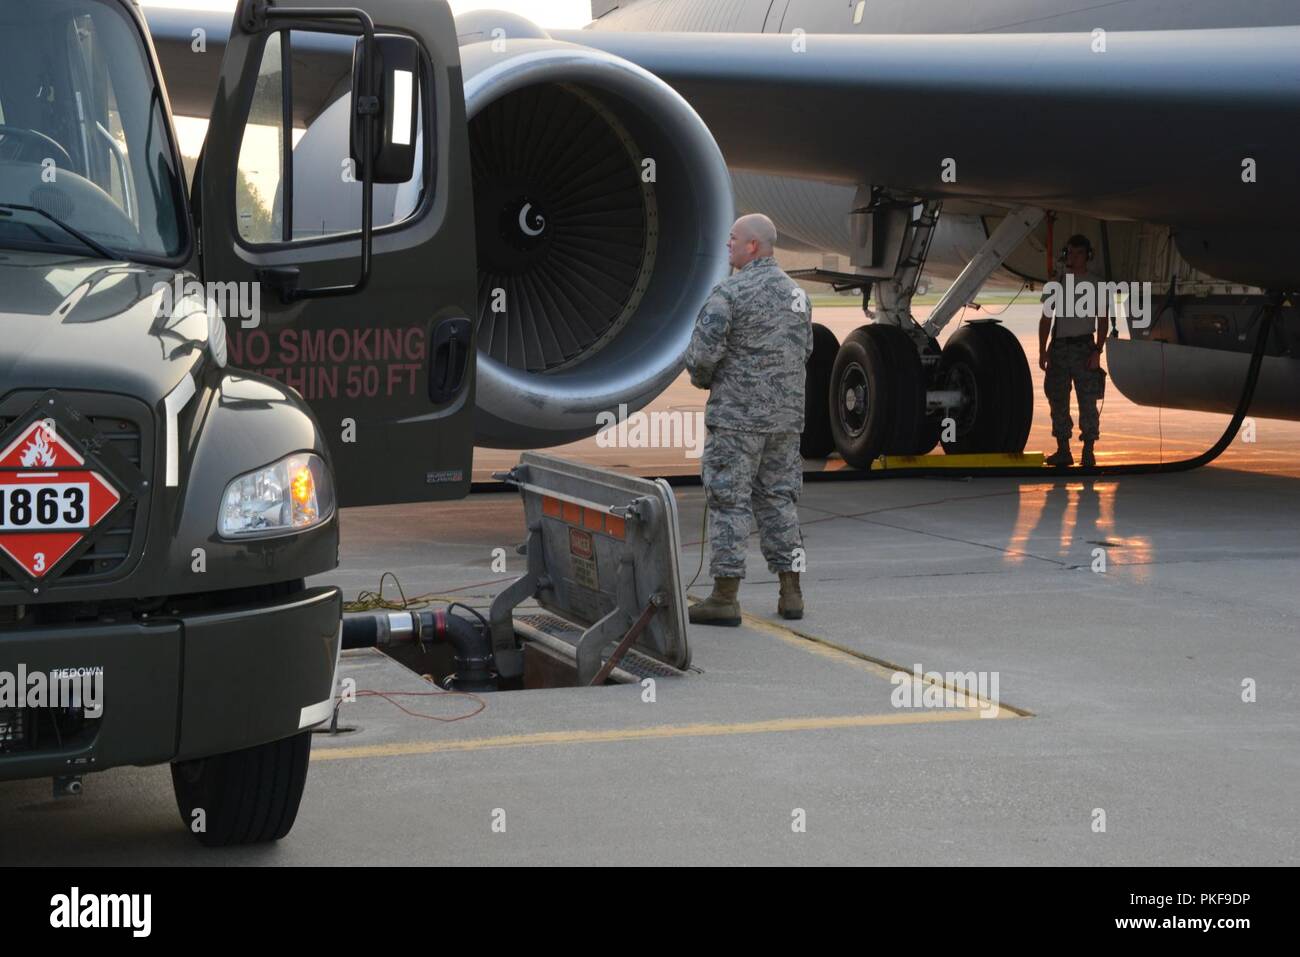 Staff Sgt. Justin Kernen 132d Wing, Iowa Air National Guard, Des Moines, Iowa works with 185th Air Refueling Wing Crew Chief, Staff Sgt. Layton Welsh fueling a U.S. Air Force KC-135 on the morning of August 10, 2018 in Sioux City, Iowa. Kernen is on loan to the 185th ARW this week performing annual training.    U.S. Air National Guard Stock Photo